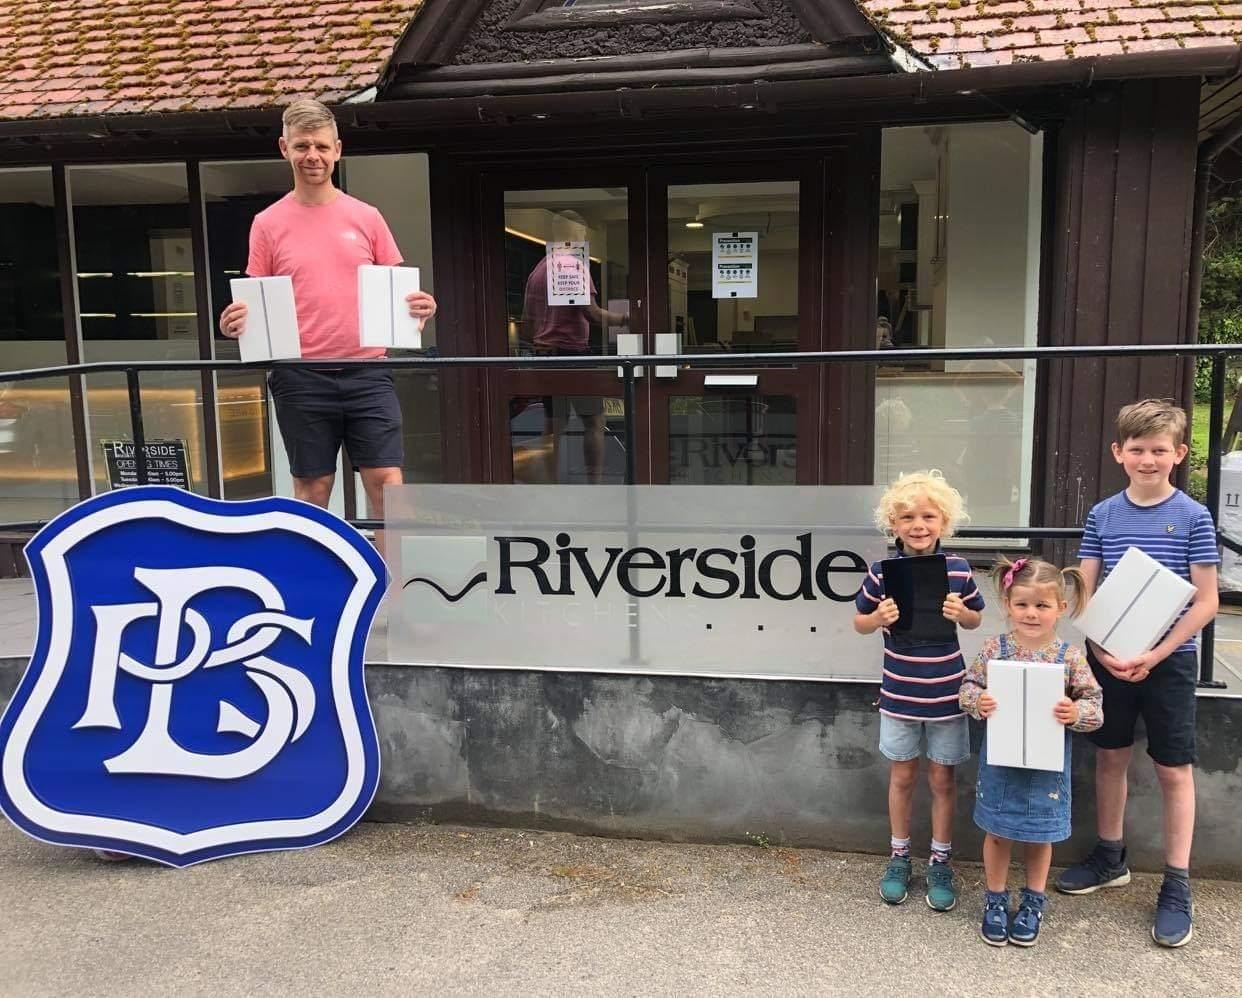 From left, Bishopmill Primary School deputy head teacher Kevin Stuart, brothers and sister Hudson and Anna, and Harris. Hudson and Harris are Bishopmill Primary pupils.